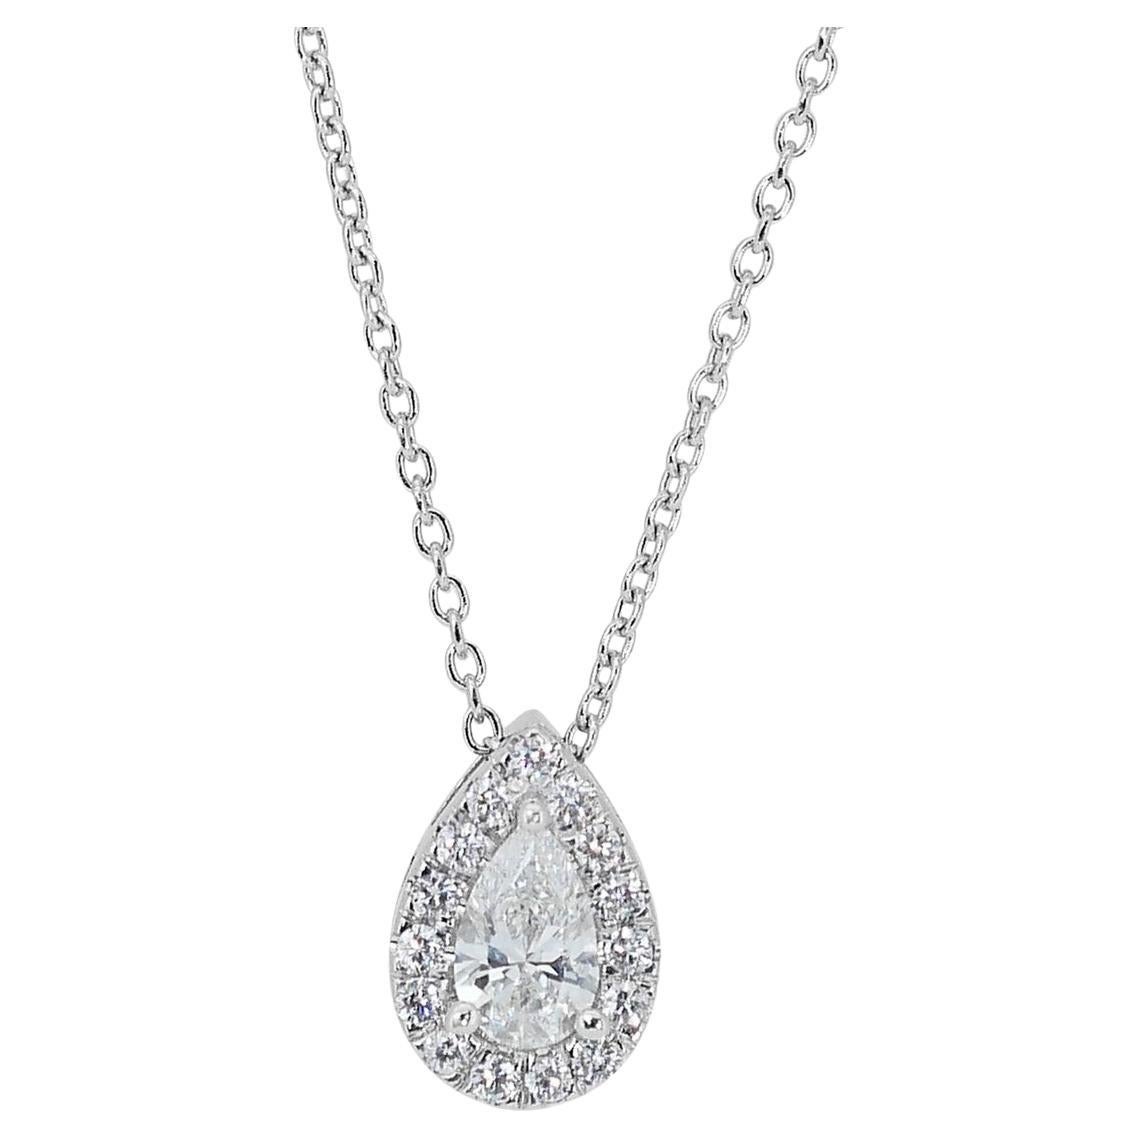 Beautiful 0.71 ct Pear Diamond Halo Necklace in 18k White Gold – GIA Certified